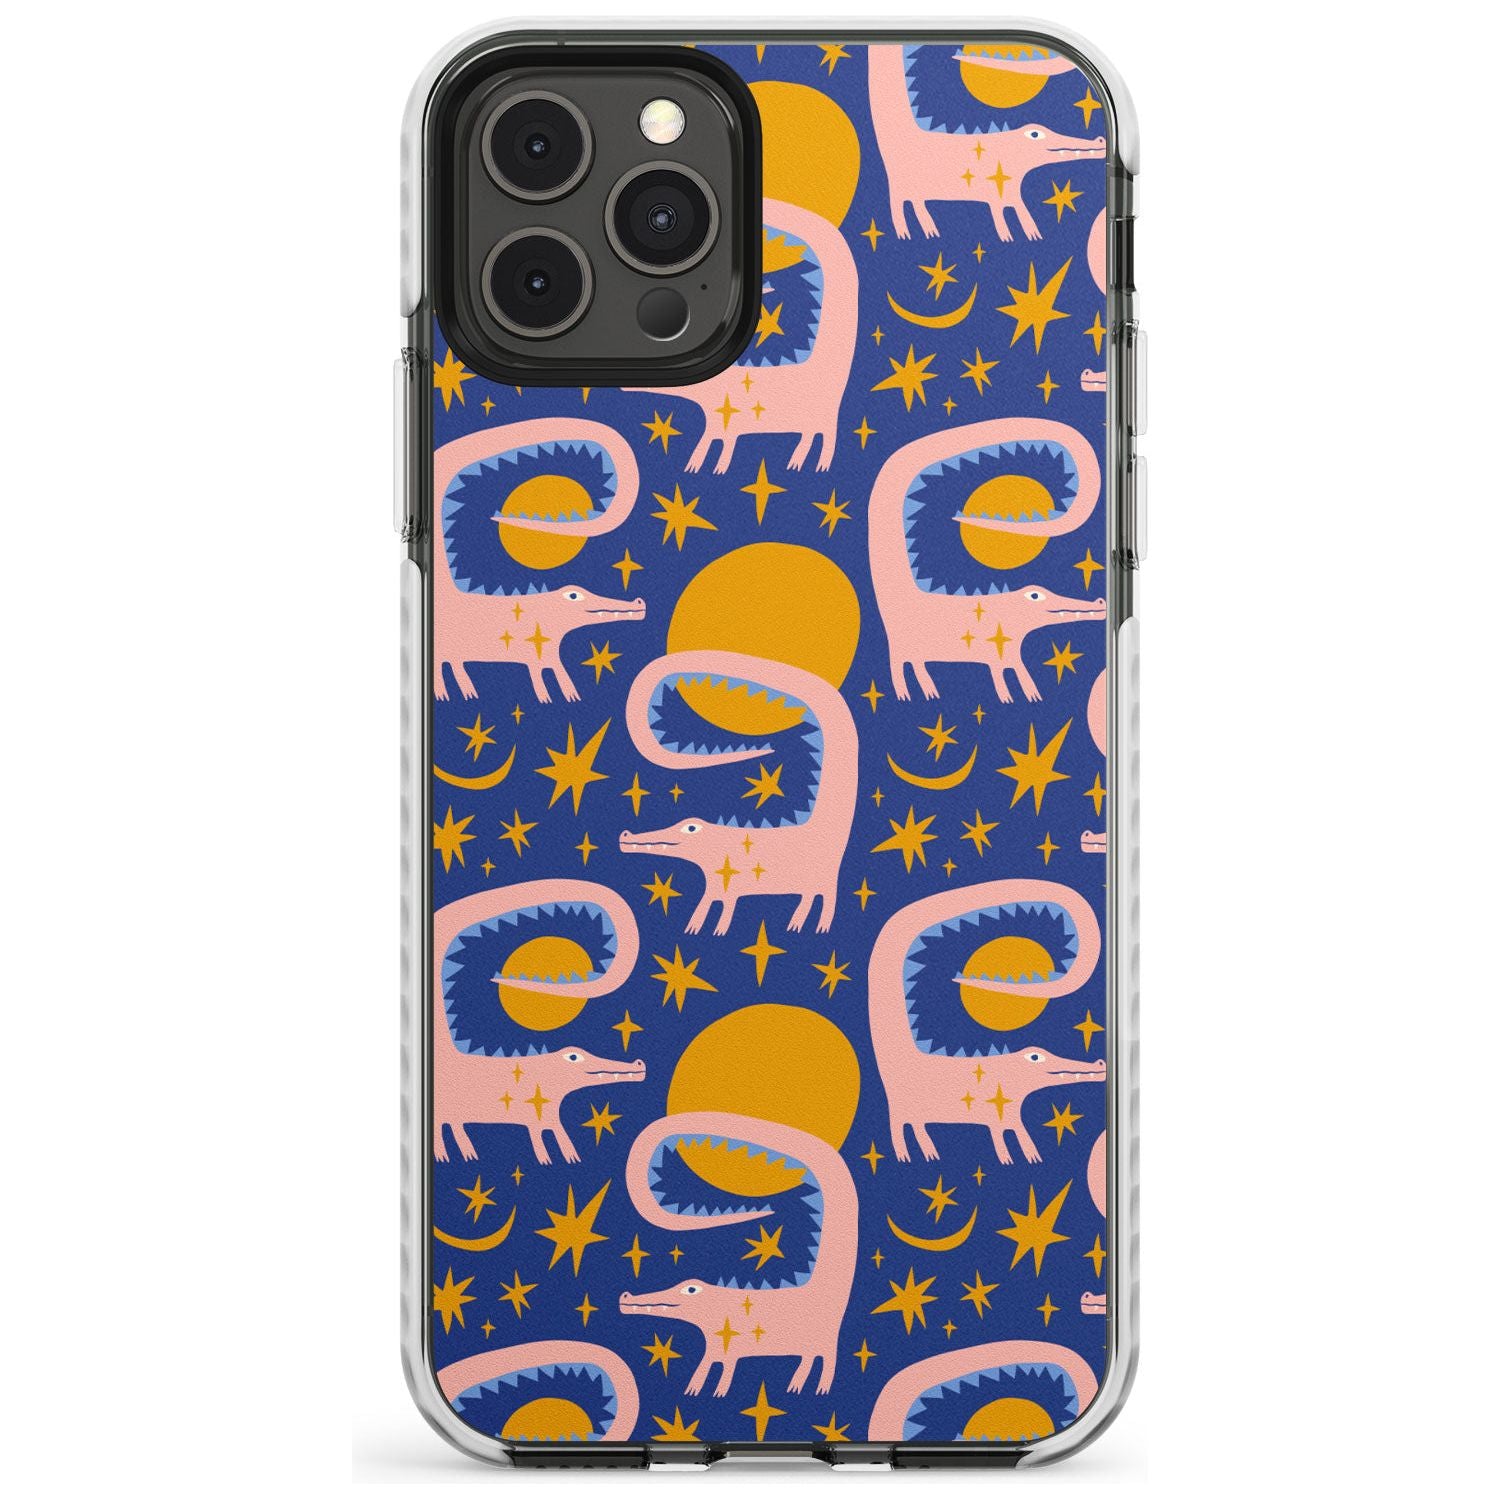 Sun Croc Pattern Impact Phone Case for iPhone 11 Pro Max